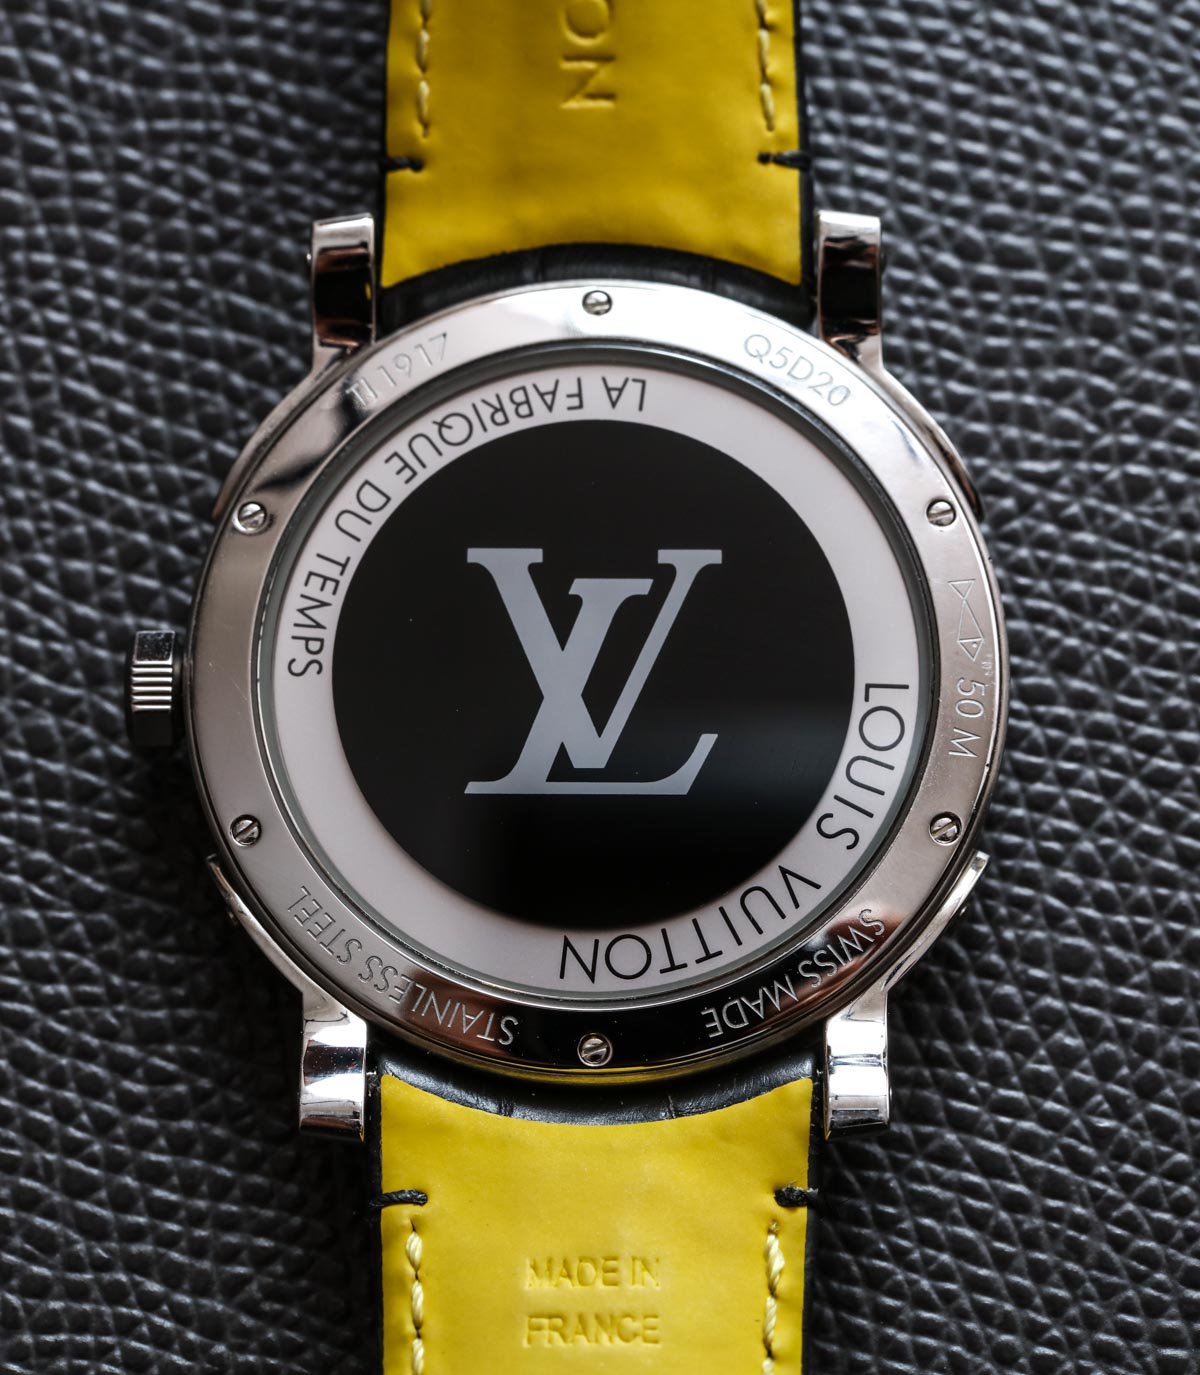 Wrist Time Review: Louis Vuitton Escale Time Zone 39 World Timer Watch, Page 2 of 2